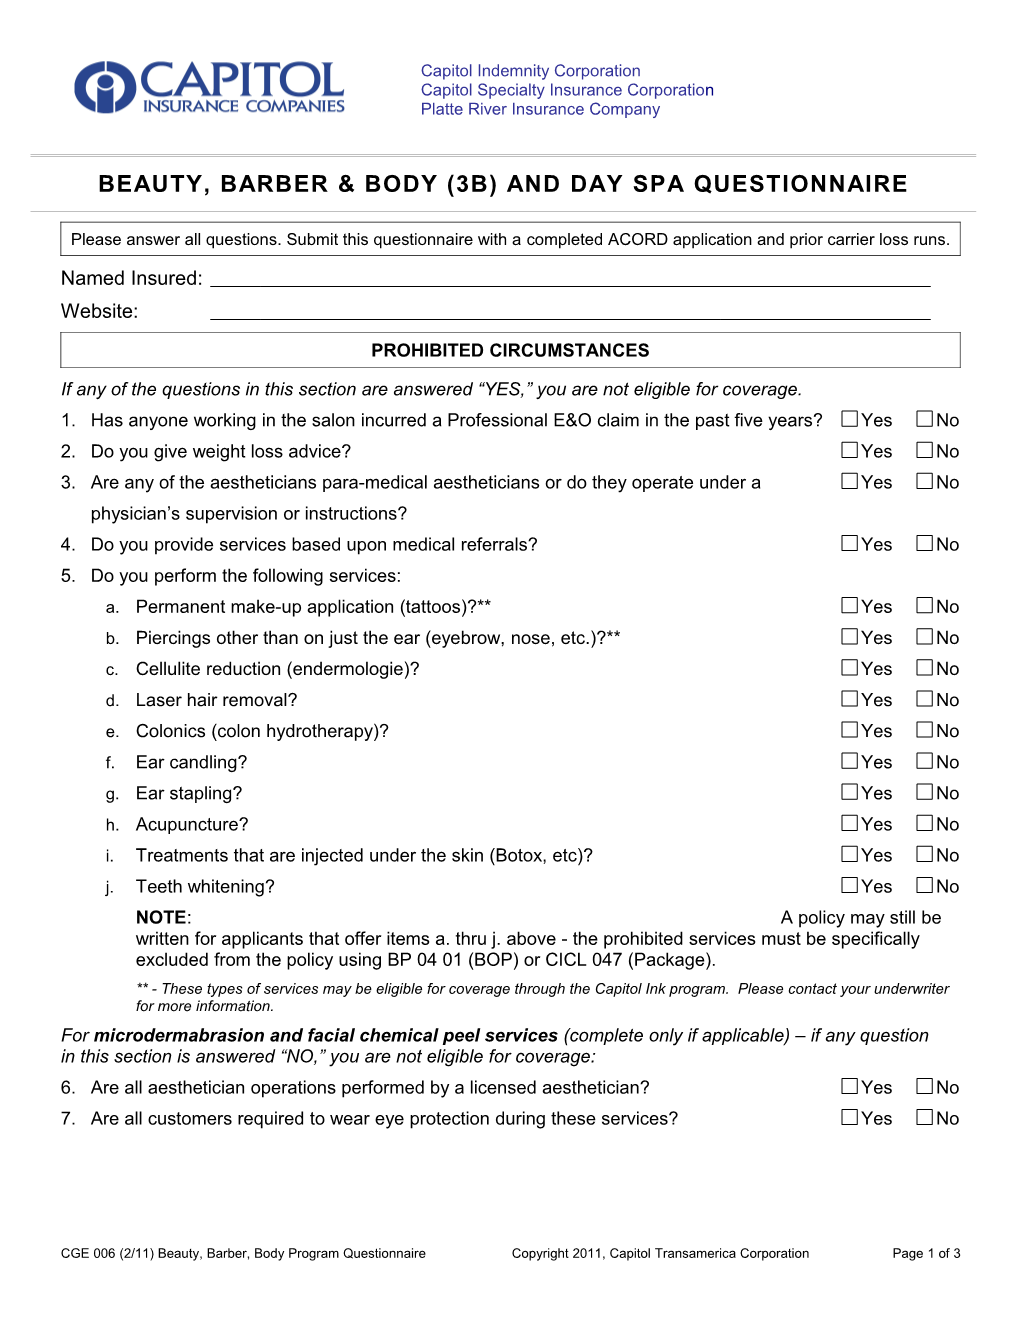 BEAUTY, BARBER & BODY (3B) and Day Spa QUESTIONNAIRE